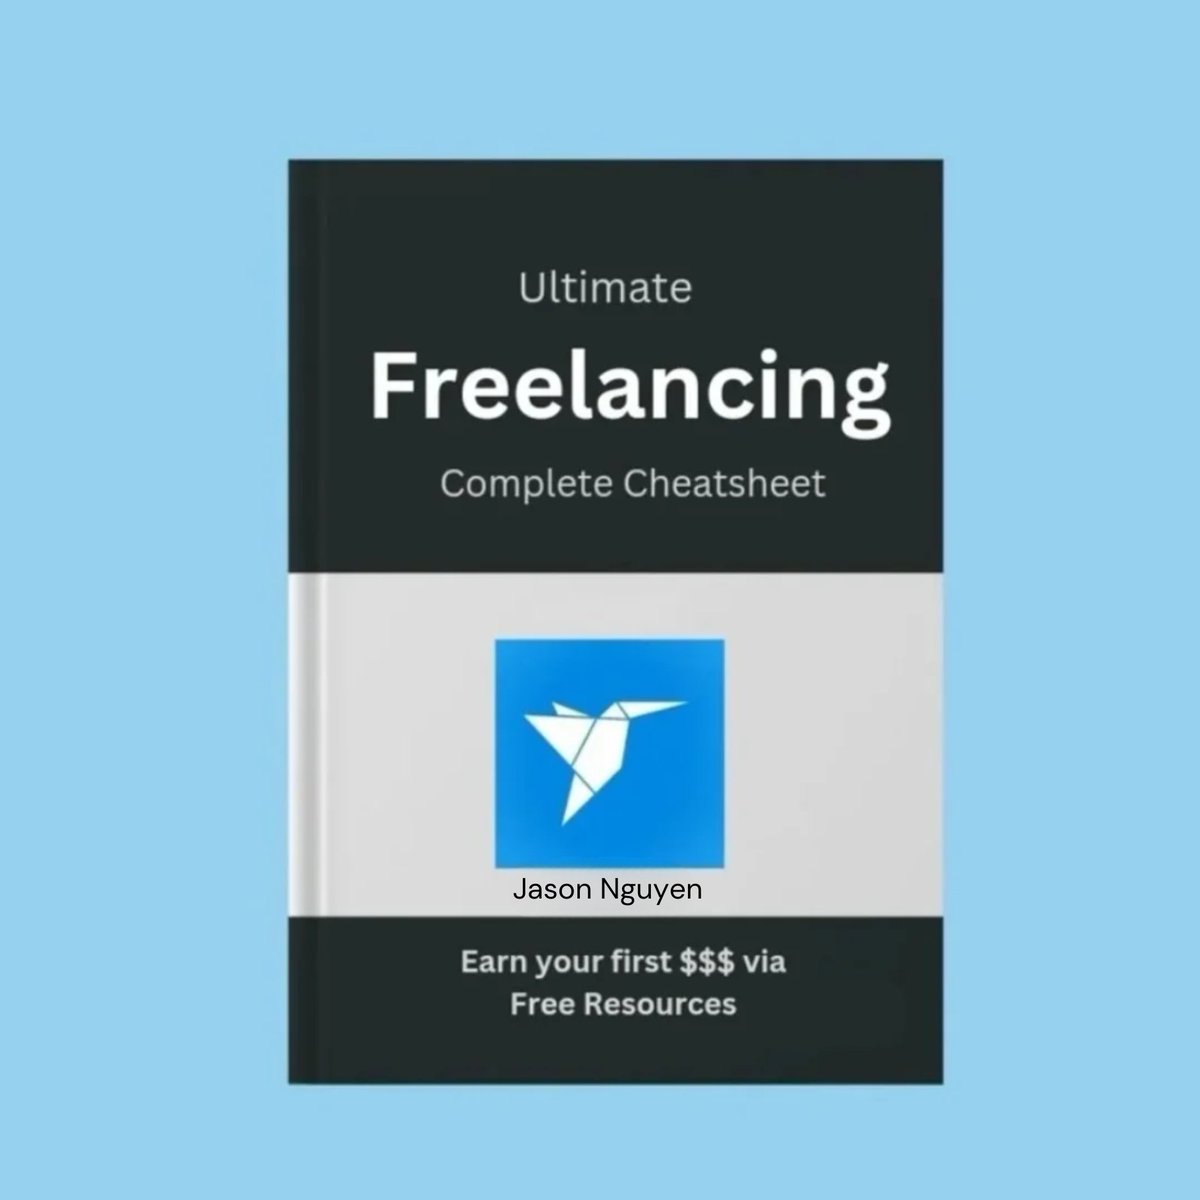 Learn the secrets to succeed as a freelancer.

FREE Cheat Sheet Inside!

This guide boosts all freelancers, new and experienced.

Get your FREE cheat sheet now to excel in freelancing!

To get it, just:

1. Like & Repost
2. Reply 'Send'
3. Follow me @its_jasonai (so I can DM)